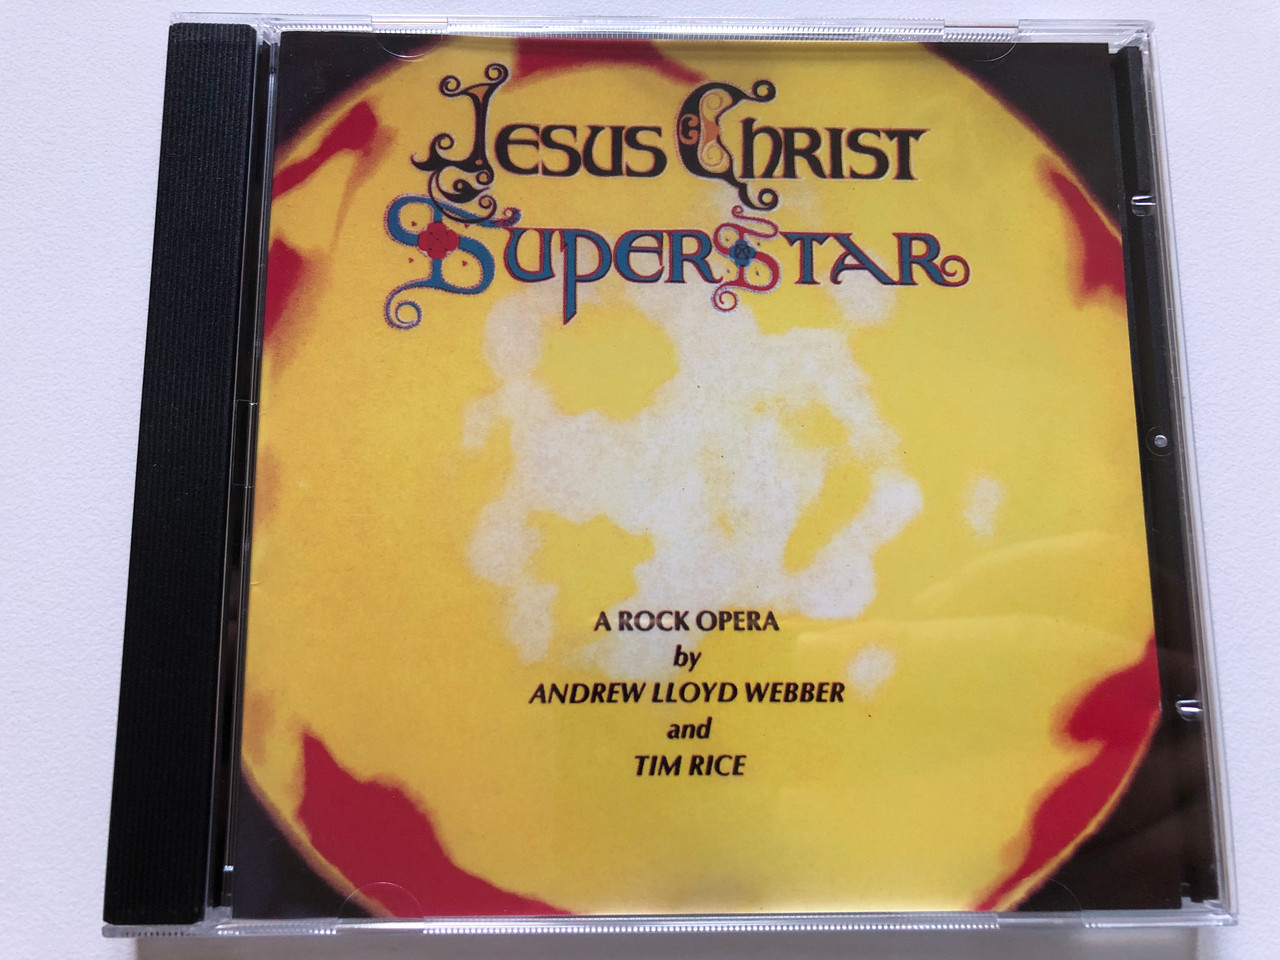 https://cdn10.bigcommerce.com/s-62bdpkt7pb/products/0/images/307880/Jesus_Christ_Superstar_-_A_Rock_Opera_by_Andrew_Lloyd_Webber_and_Tim_Rice_Ring_Audio_CD_RCD_1125_1__17804.1698906554.1280.1280.JPG?c=2